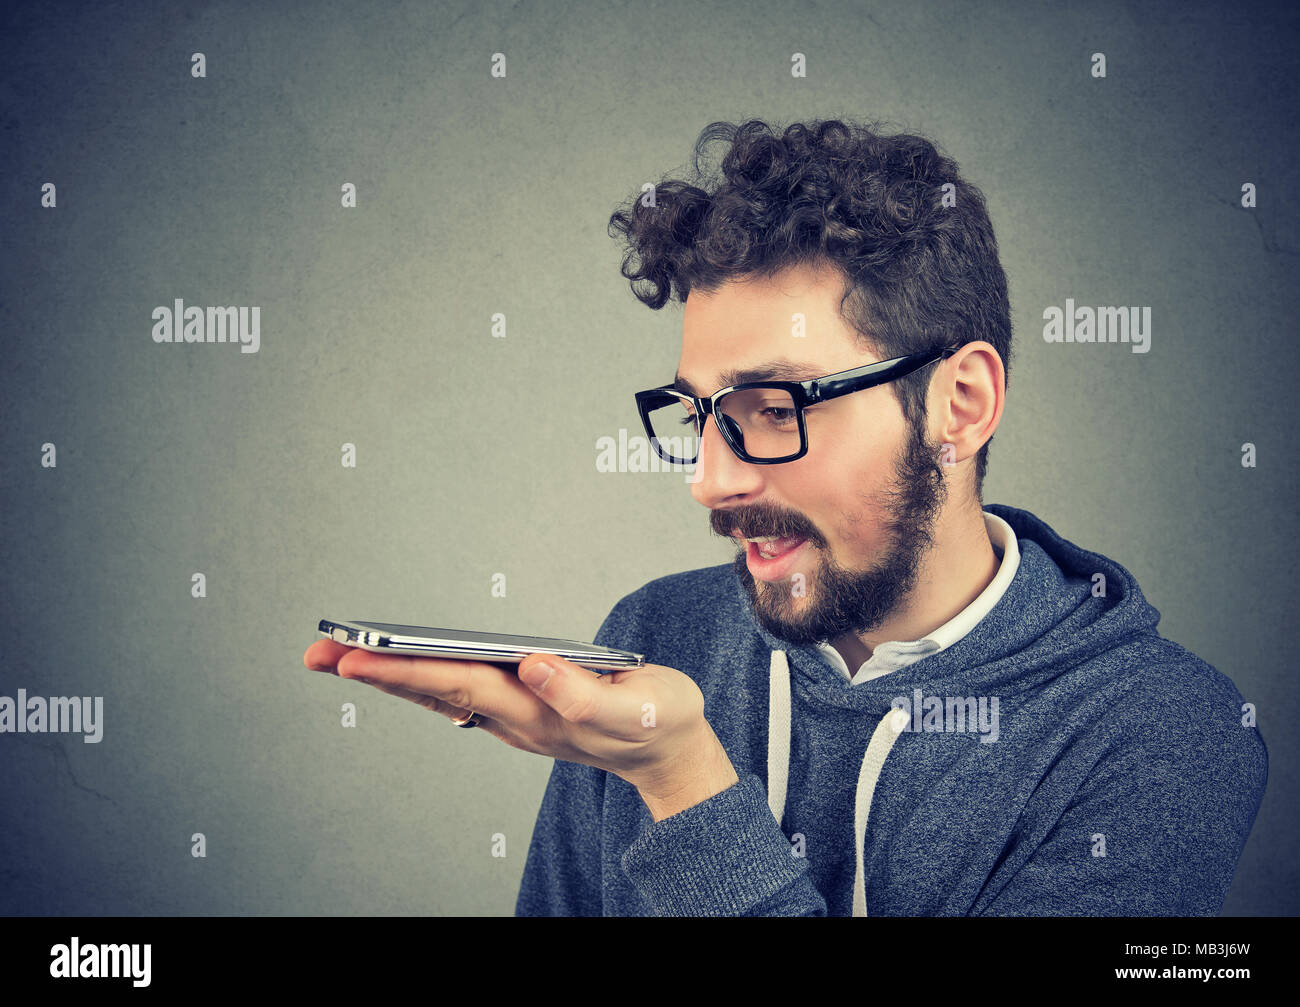 Hipster man in glasses using a smart phone voice recognition function isolated on wall background Stock Photo